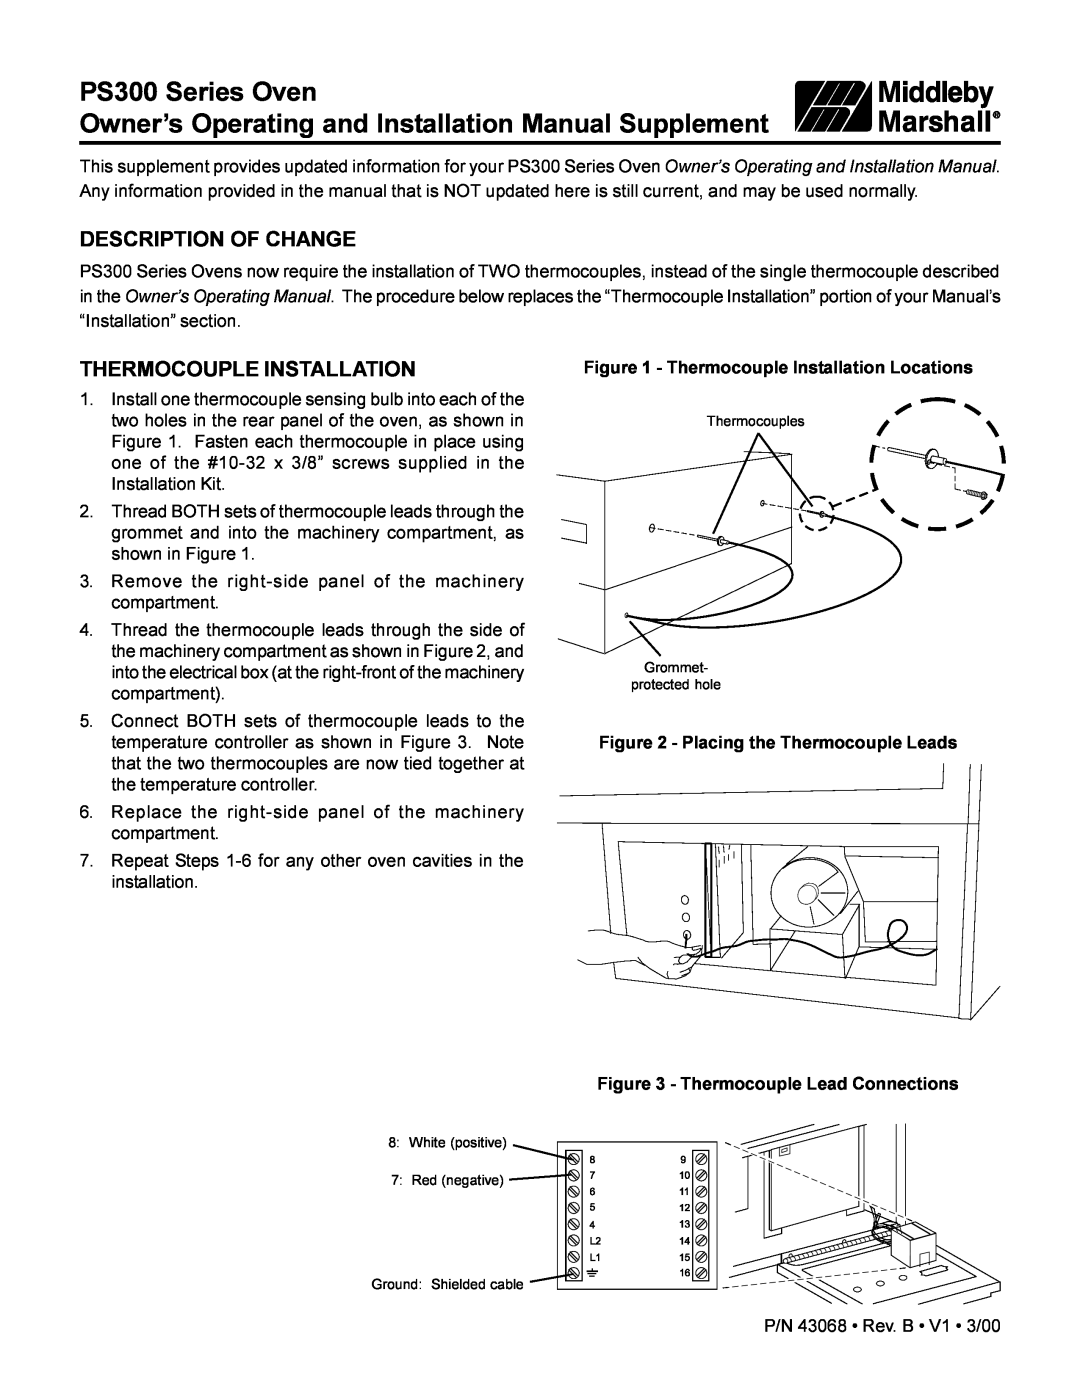 Middleby Marshall installation manual PS300 Series Oven, Description Of Change, Thermocouple Installation 